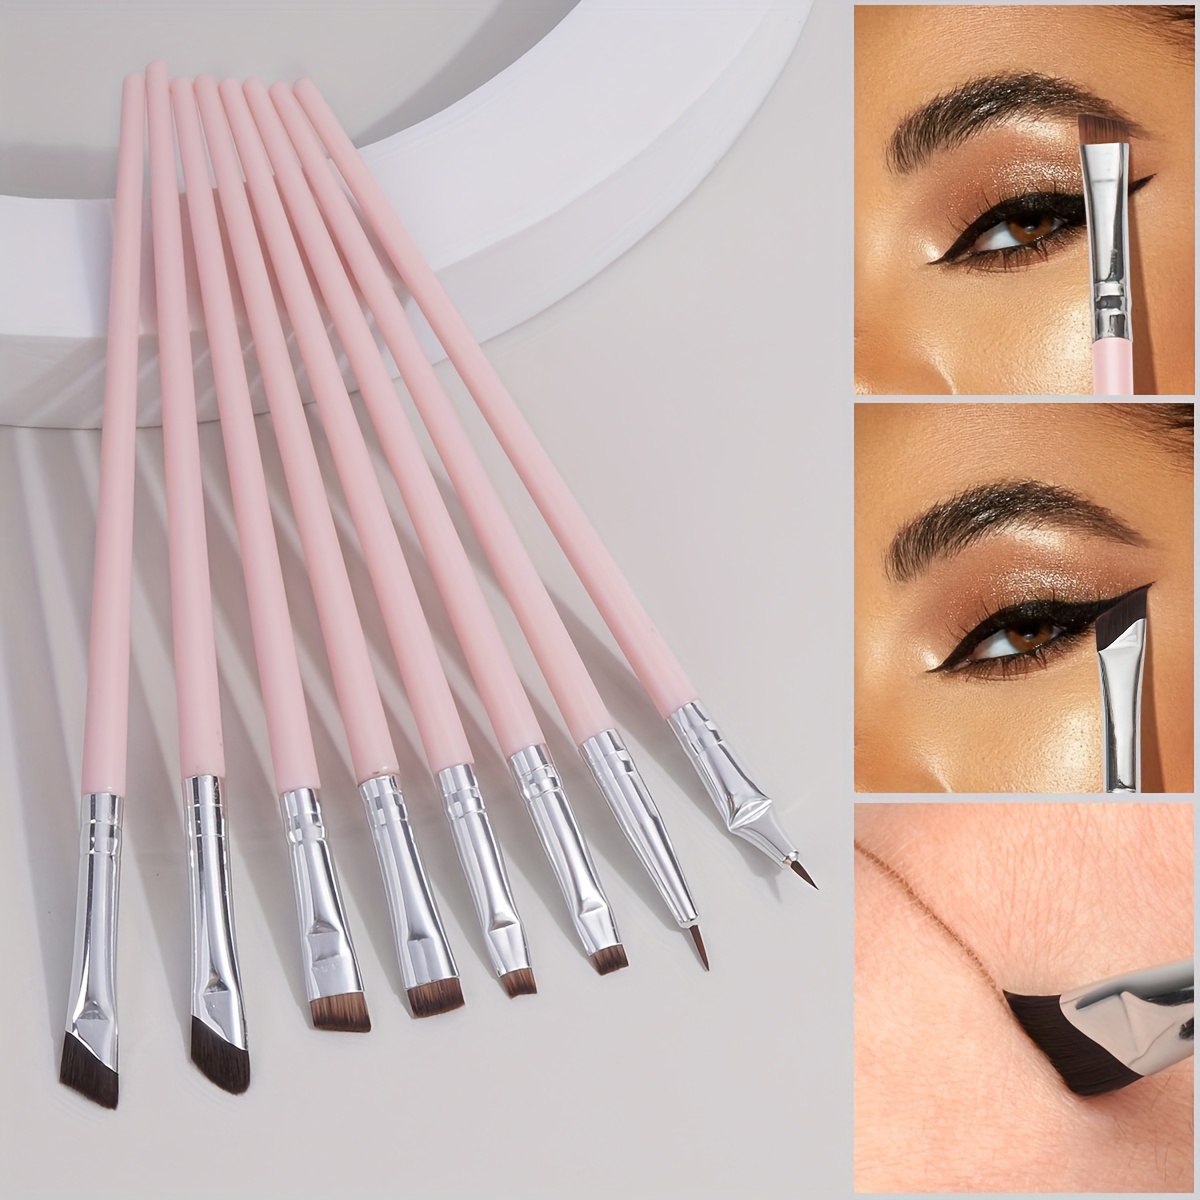 

Eye Makeup Brush Set, 8pcs Professional Mix Eyeshadow Makeup Brushes, Suitable For Concealing, Brow Drawing & Eyeliner, Various Eye Makeup Brushes Are Great For Beginners And Artists